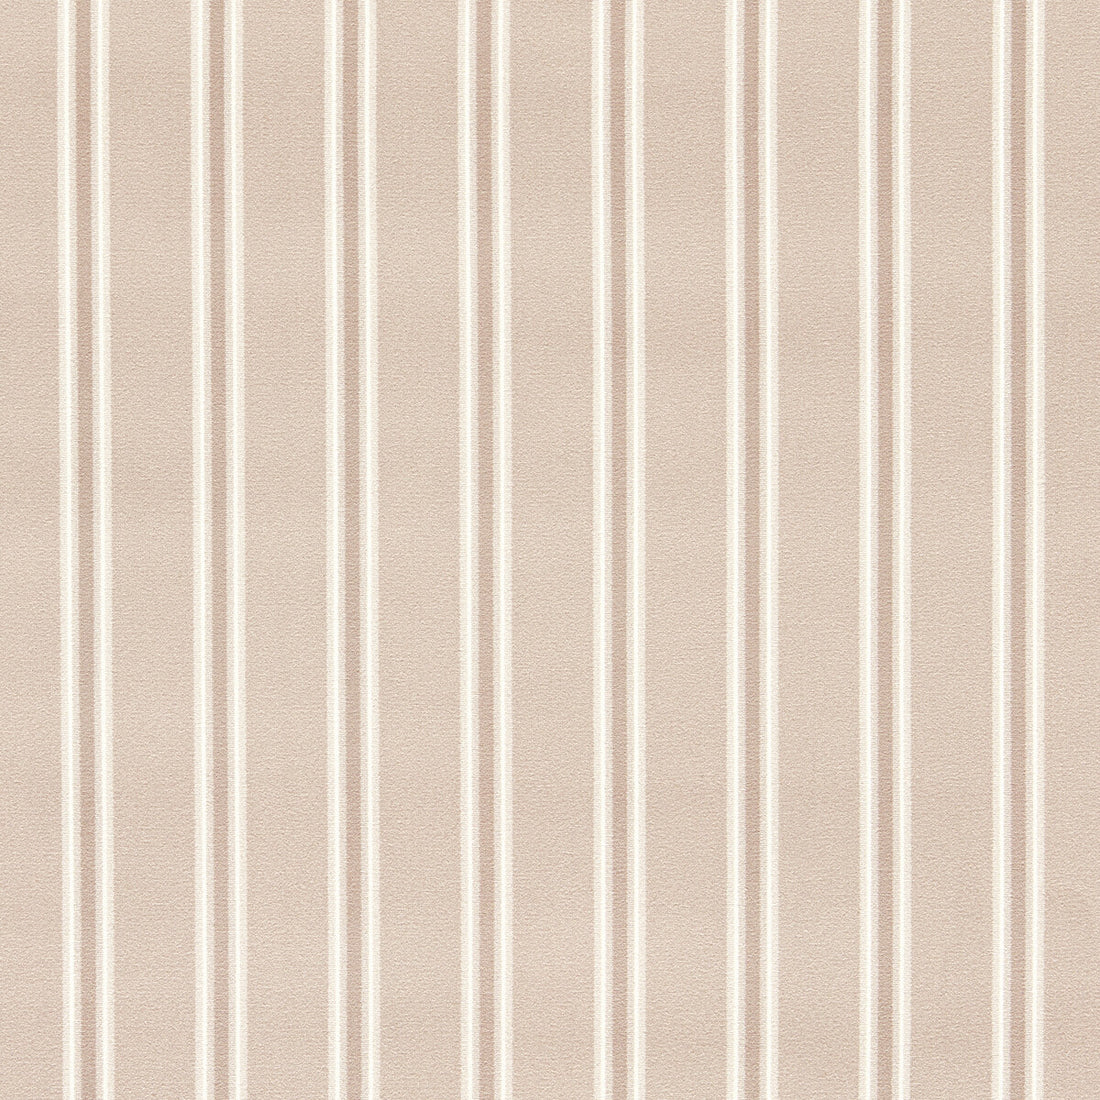 Bowfell fabric in blush color - pattern F1689/02.CAC.0 - by Clarke And Clarke in the Whitworth collection